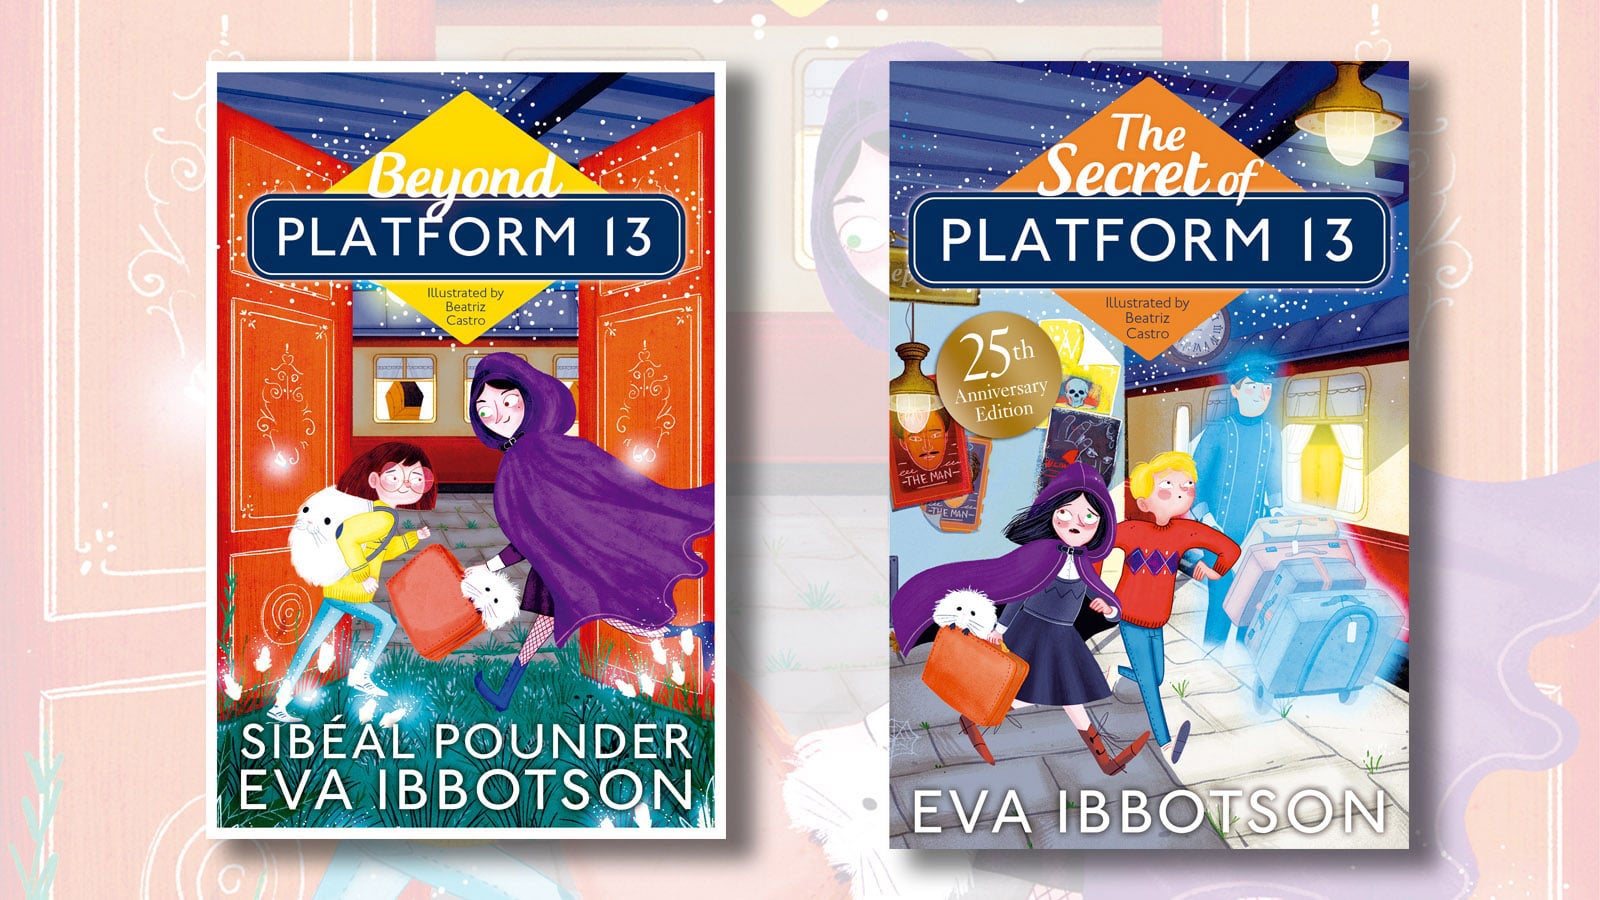 Book Covers for Beyond Platform 13 by Sibeal Pounder and Eva Ibbotson and The Secret of Platform 13 by Eva Ibbotson